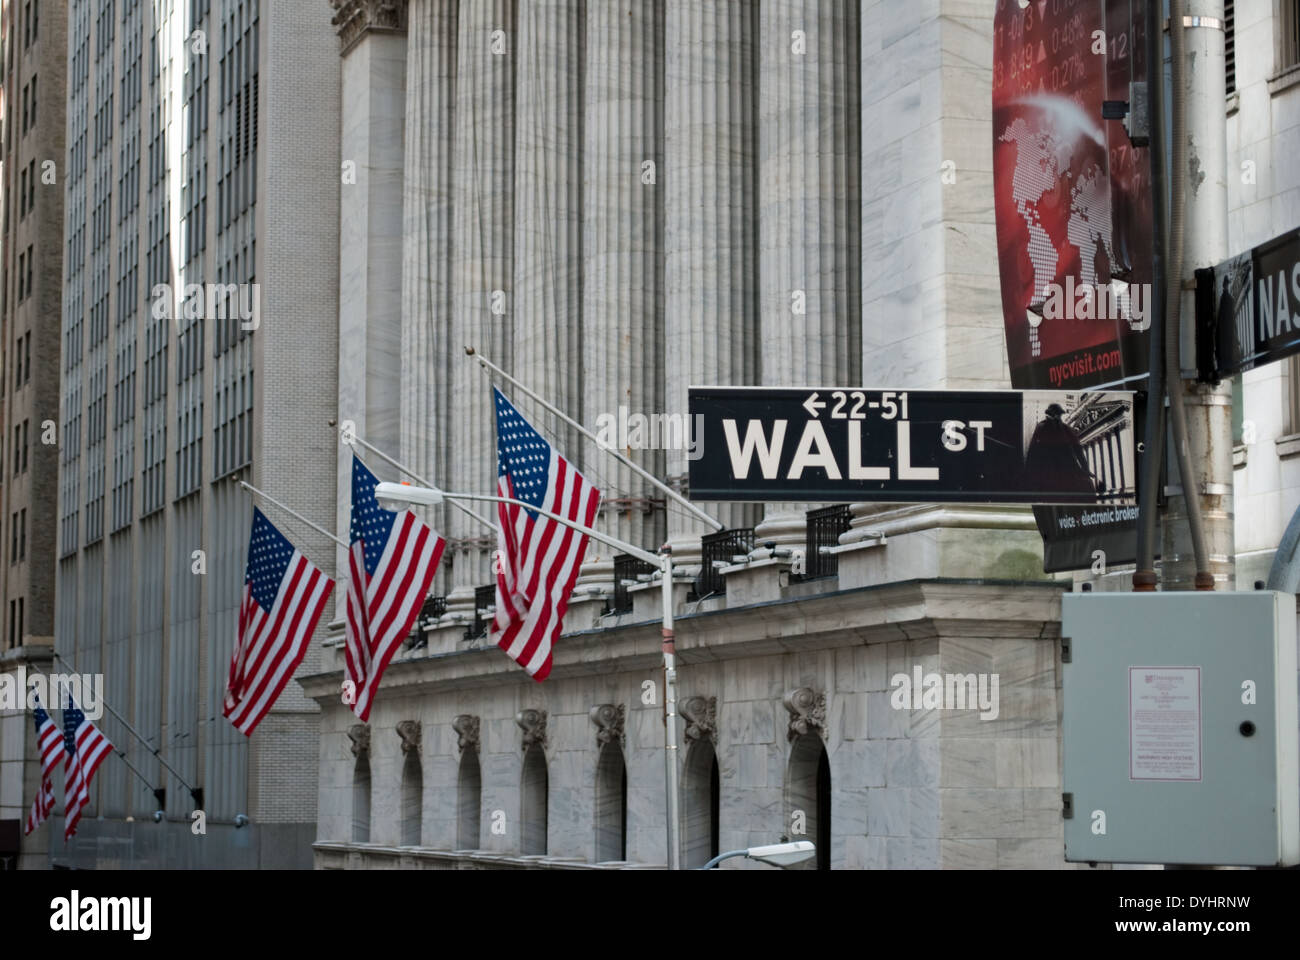 Wall street Banque D'Images